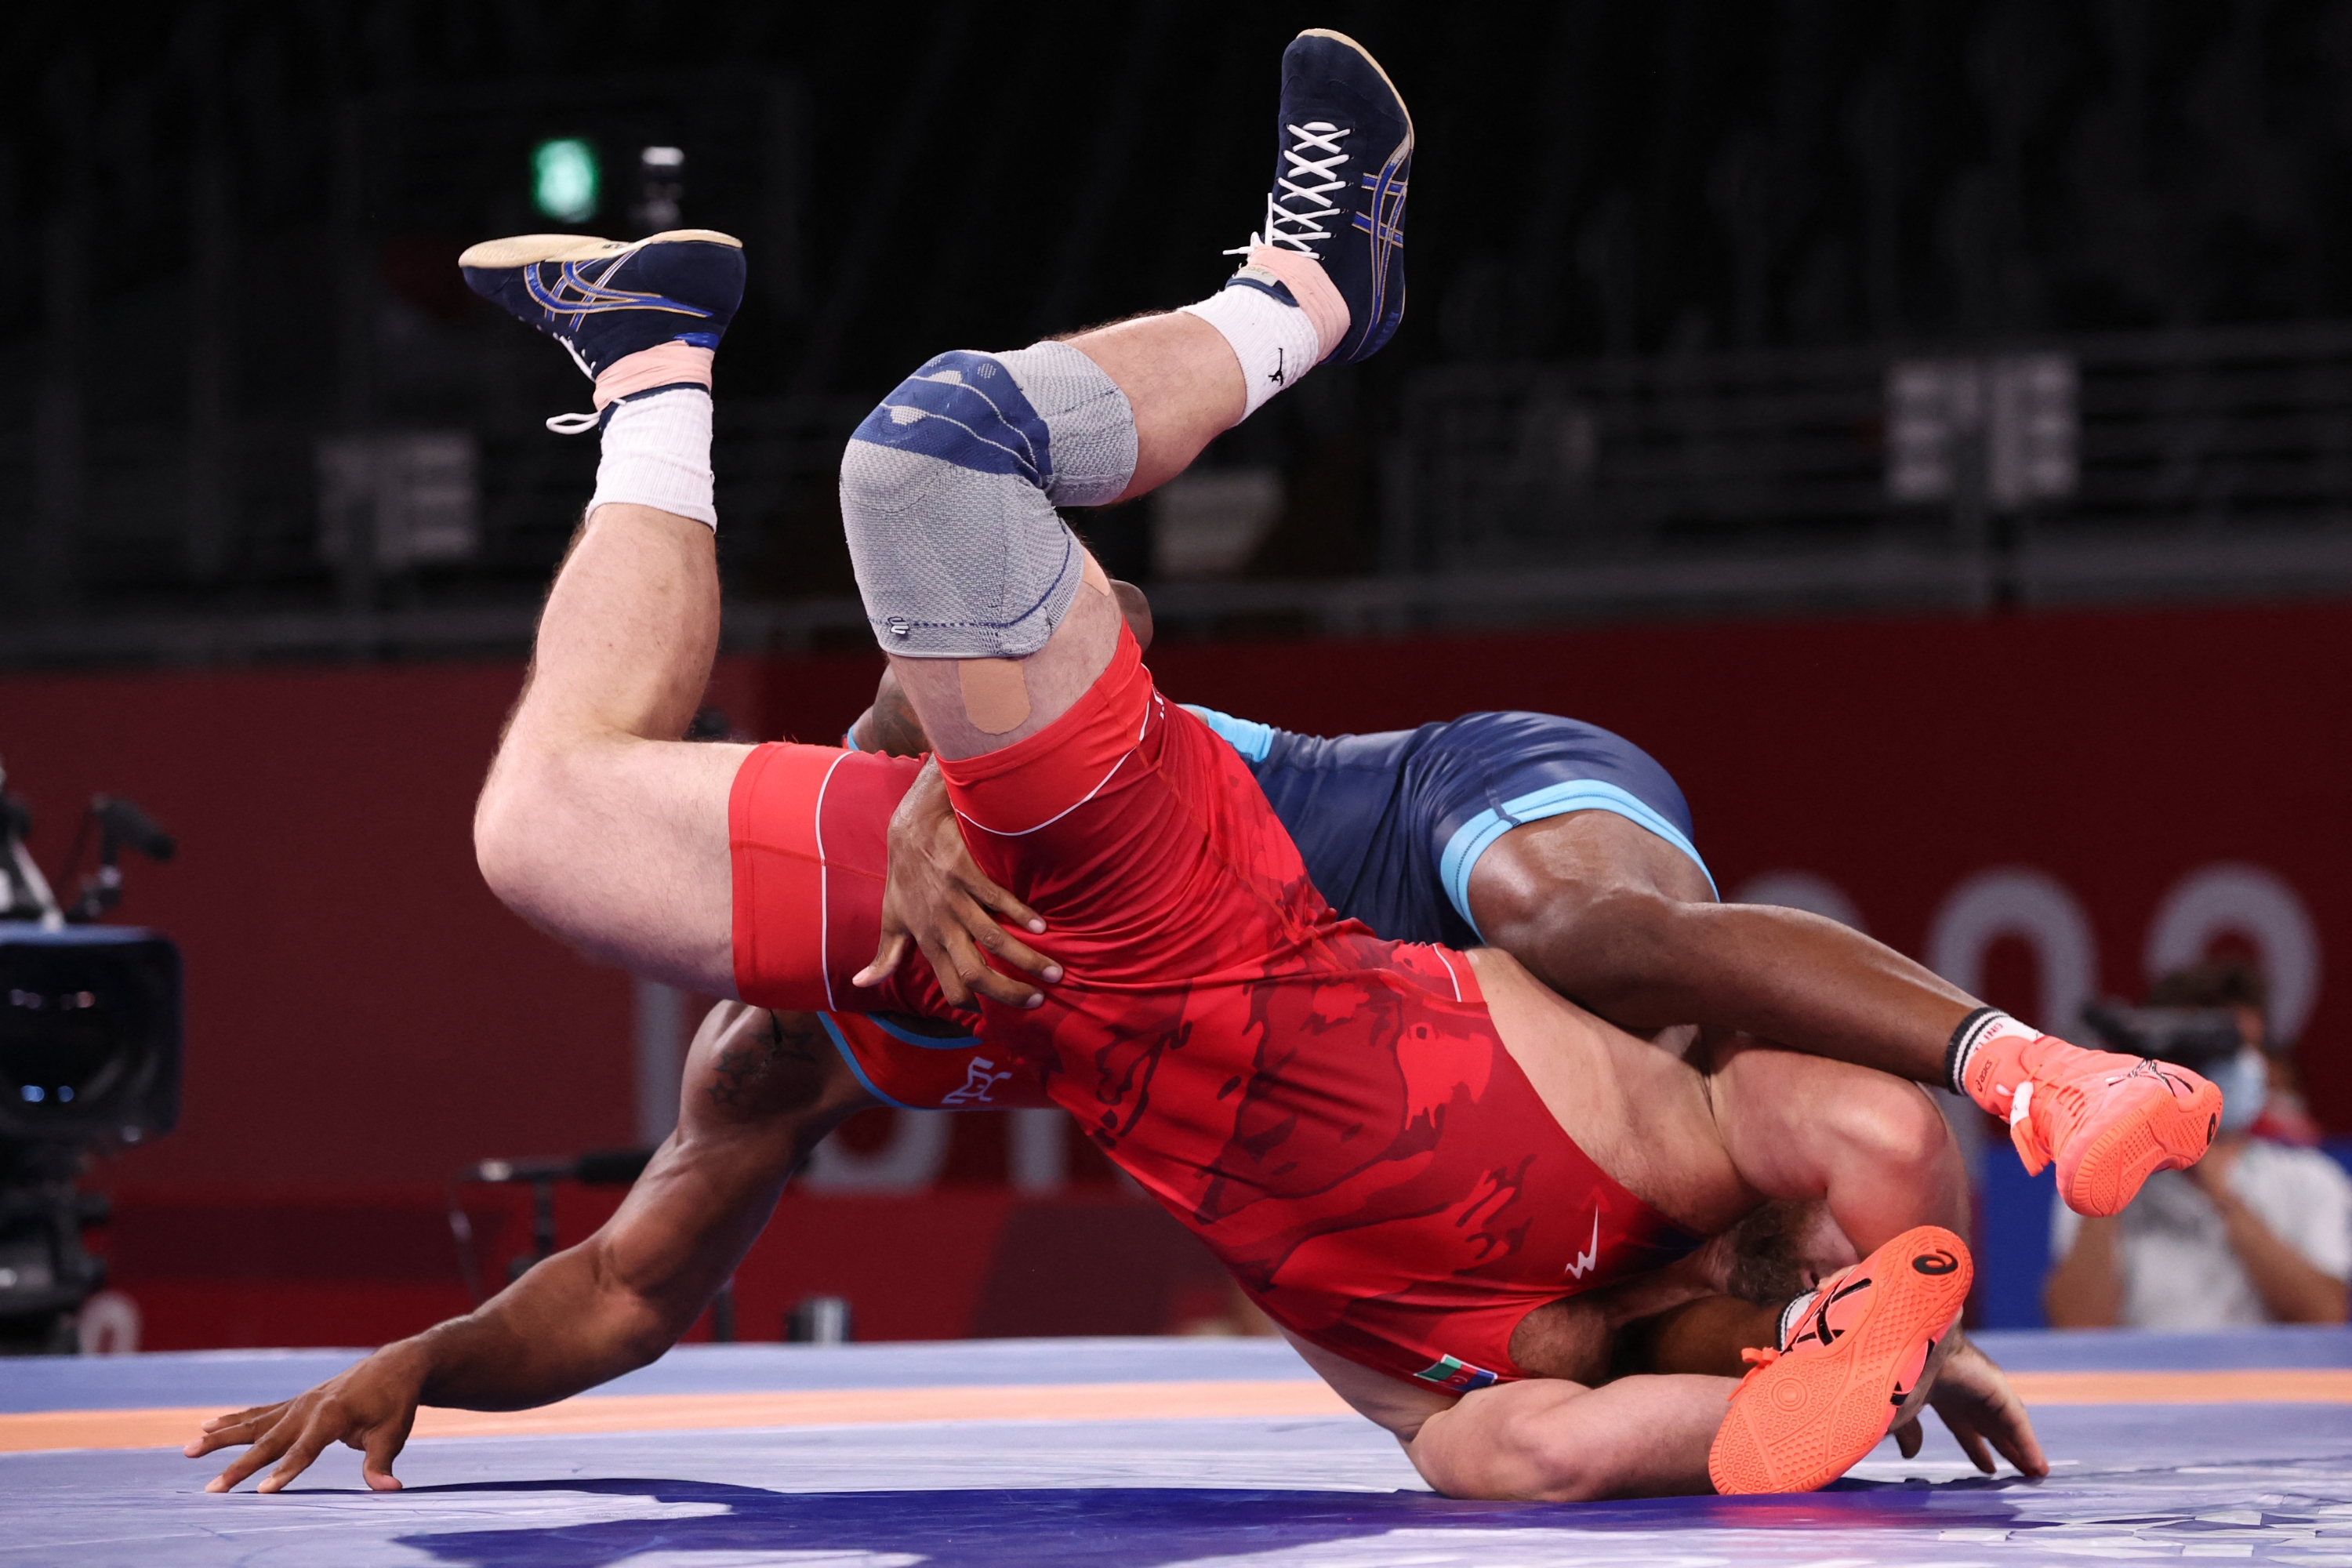 Cuba's Reineris Salas Perez (blue) wrestles Azerbaijan's Sharif Sharifov in their men's freestyle 97kg wrestling bronze medal match during the Tokyo 2020 Olympic Games at the Makuhari Messe in Tokyo on August 7, 2021. (Photo by Jack GUEZ / AFP)